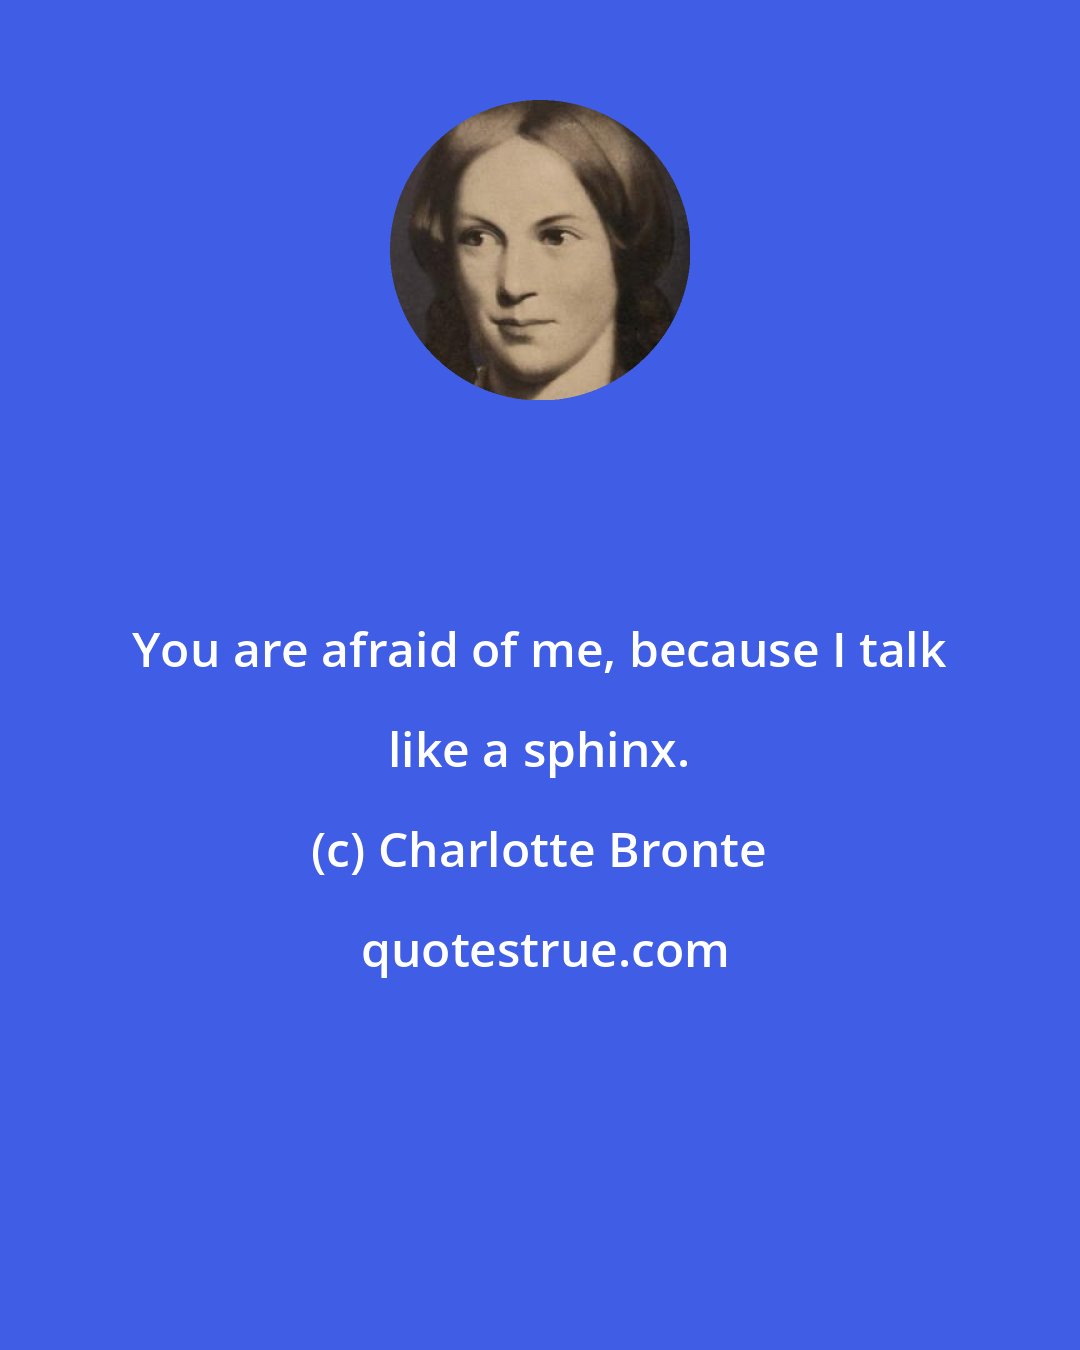 Charlotte Bronte: You are afraid of me, because I talk like a sphinx.